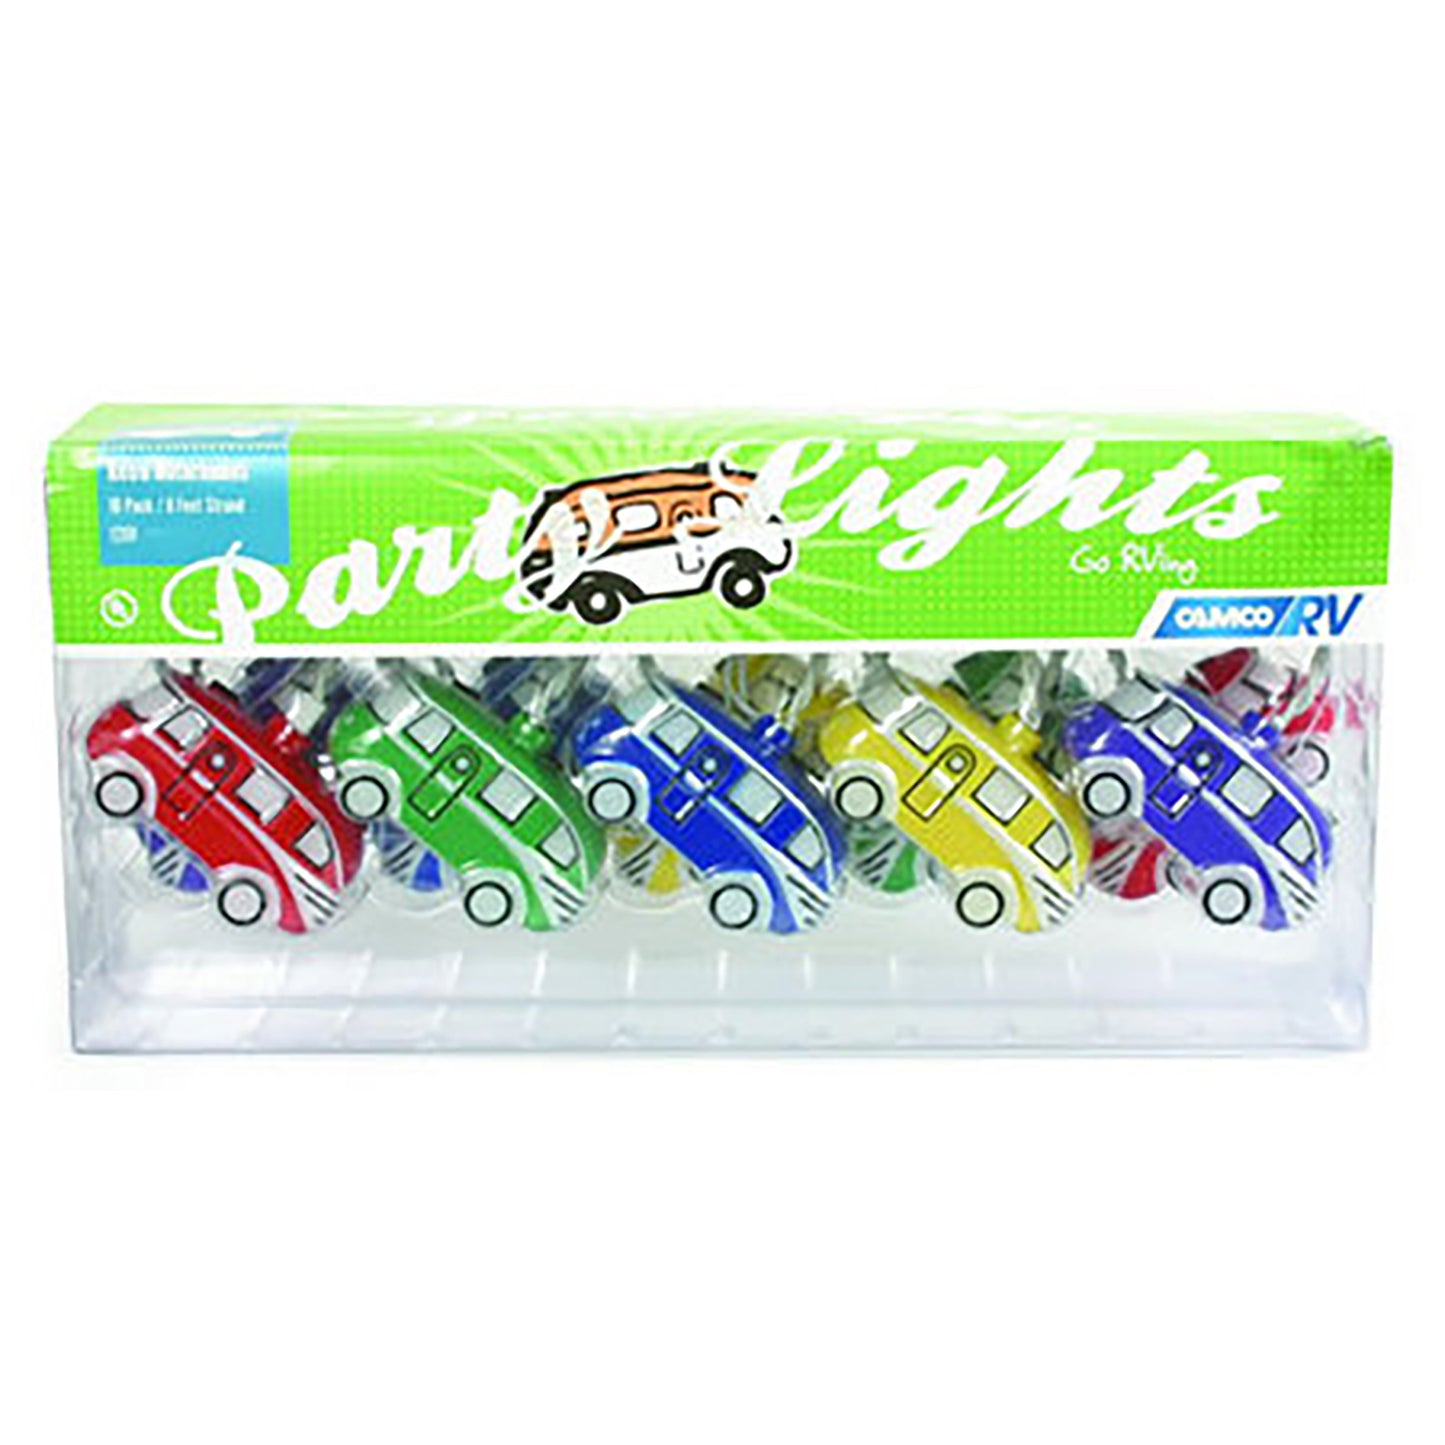 8FT PARTY LIGHTS